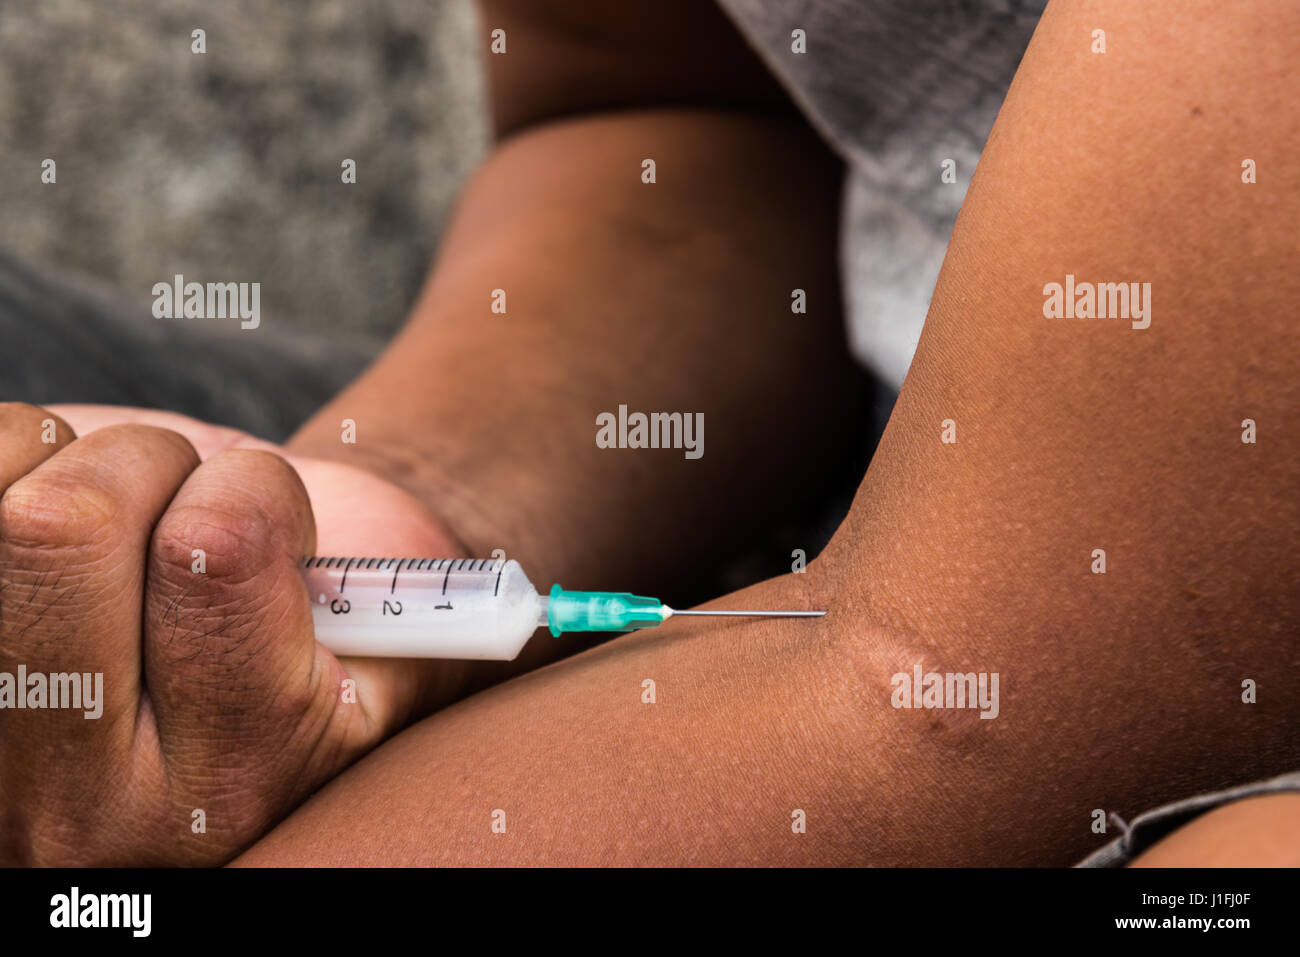 Teenager hand with heroin syringe closeup, narcotic drugs addiction concept Stock Photo